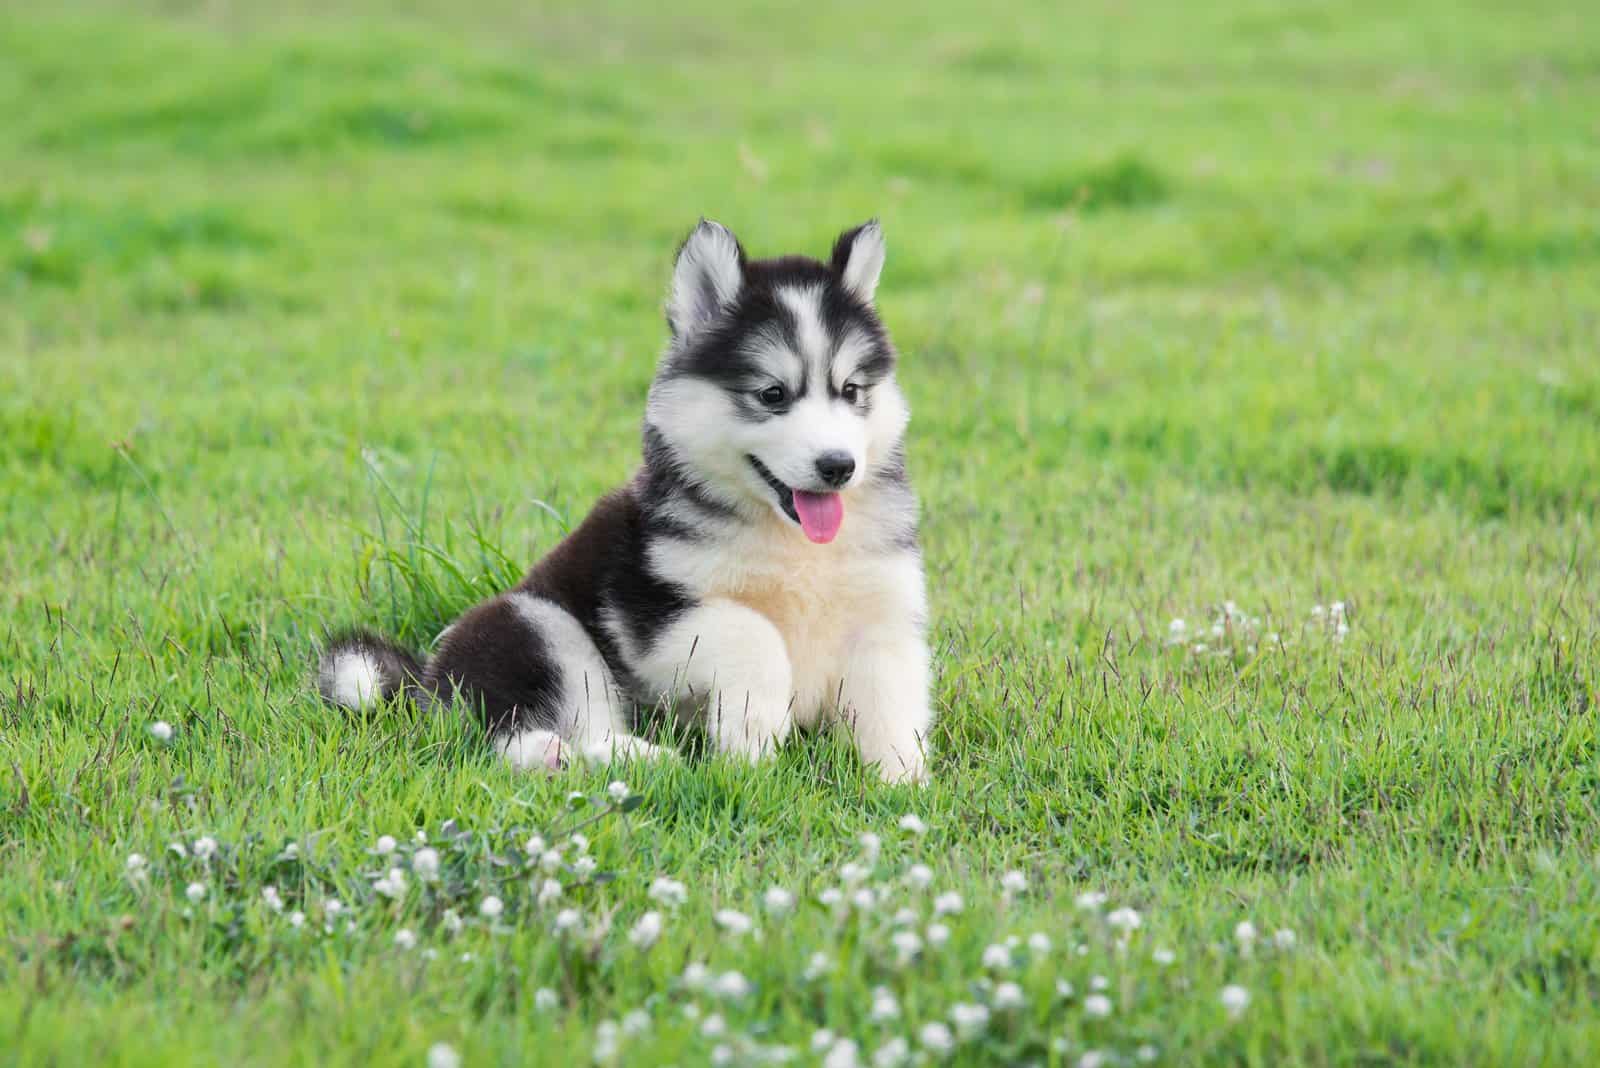 the adorable husky rock sits in the grass